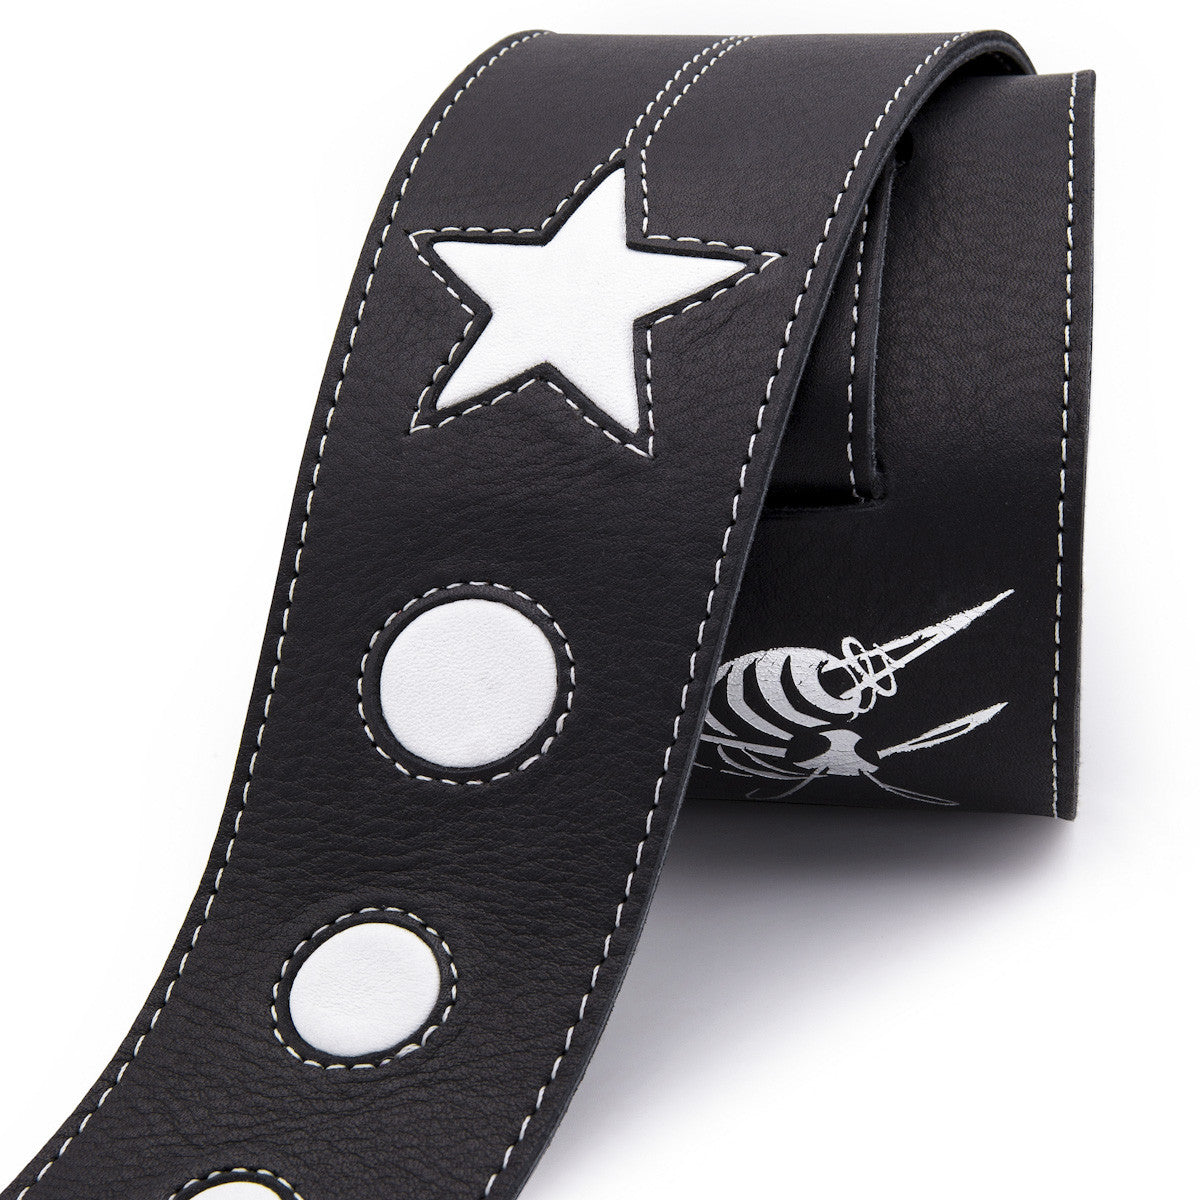 Black/White Leather Guitar Strap  Handcrafted in Montreal, Canada -  Stinger Straps